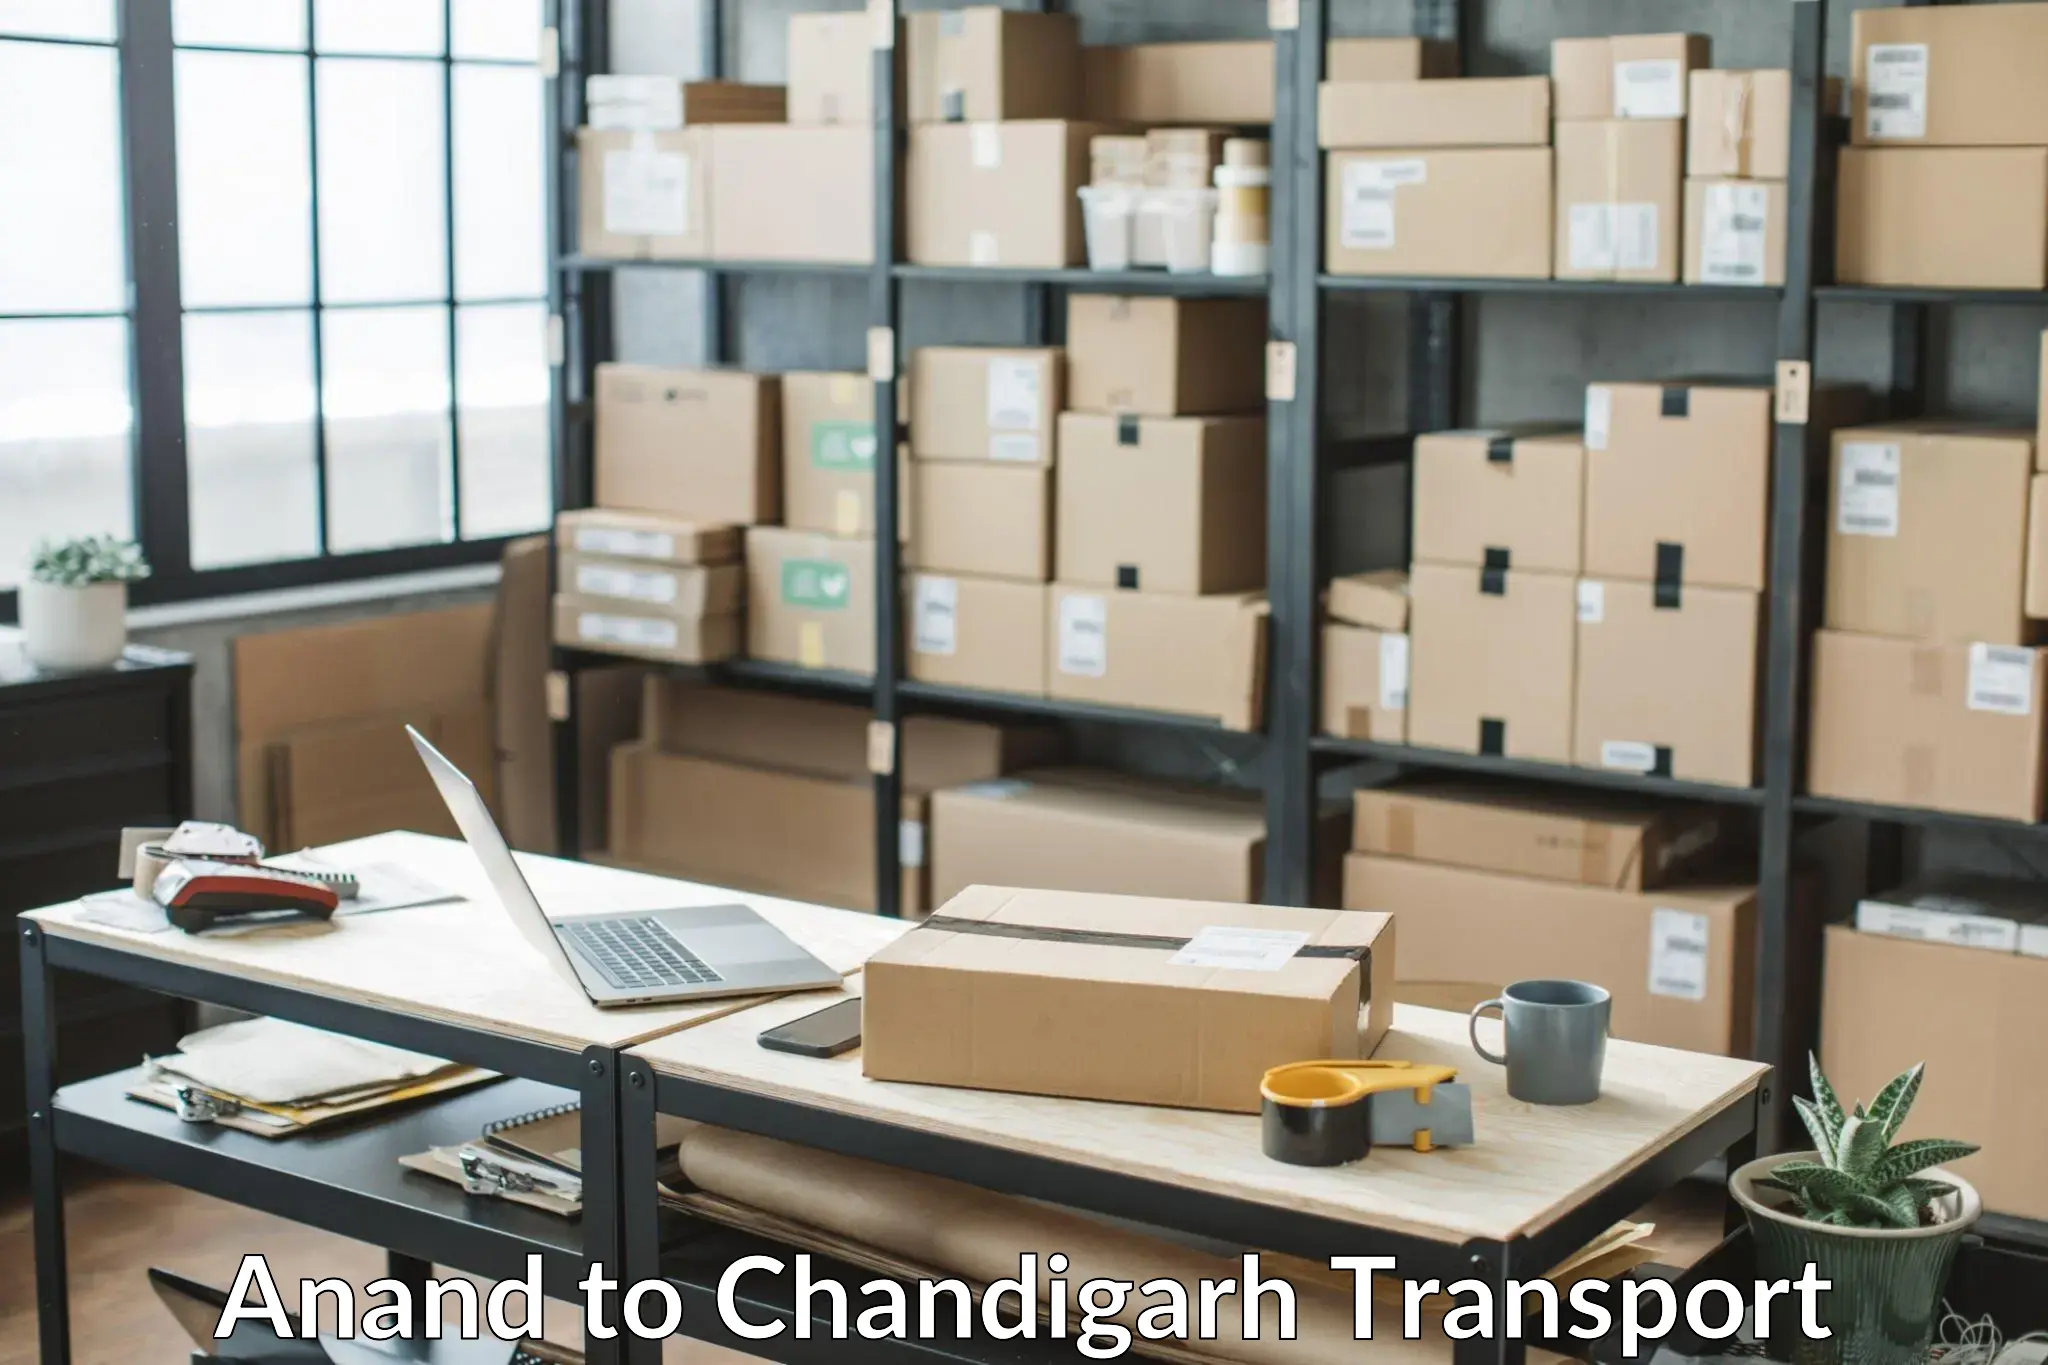 All India transport service Anand to Chandigarh